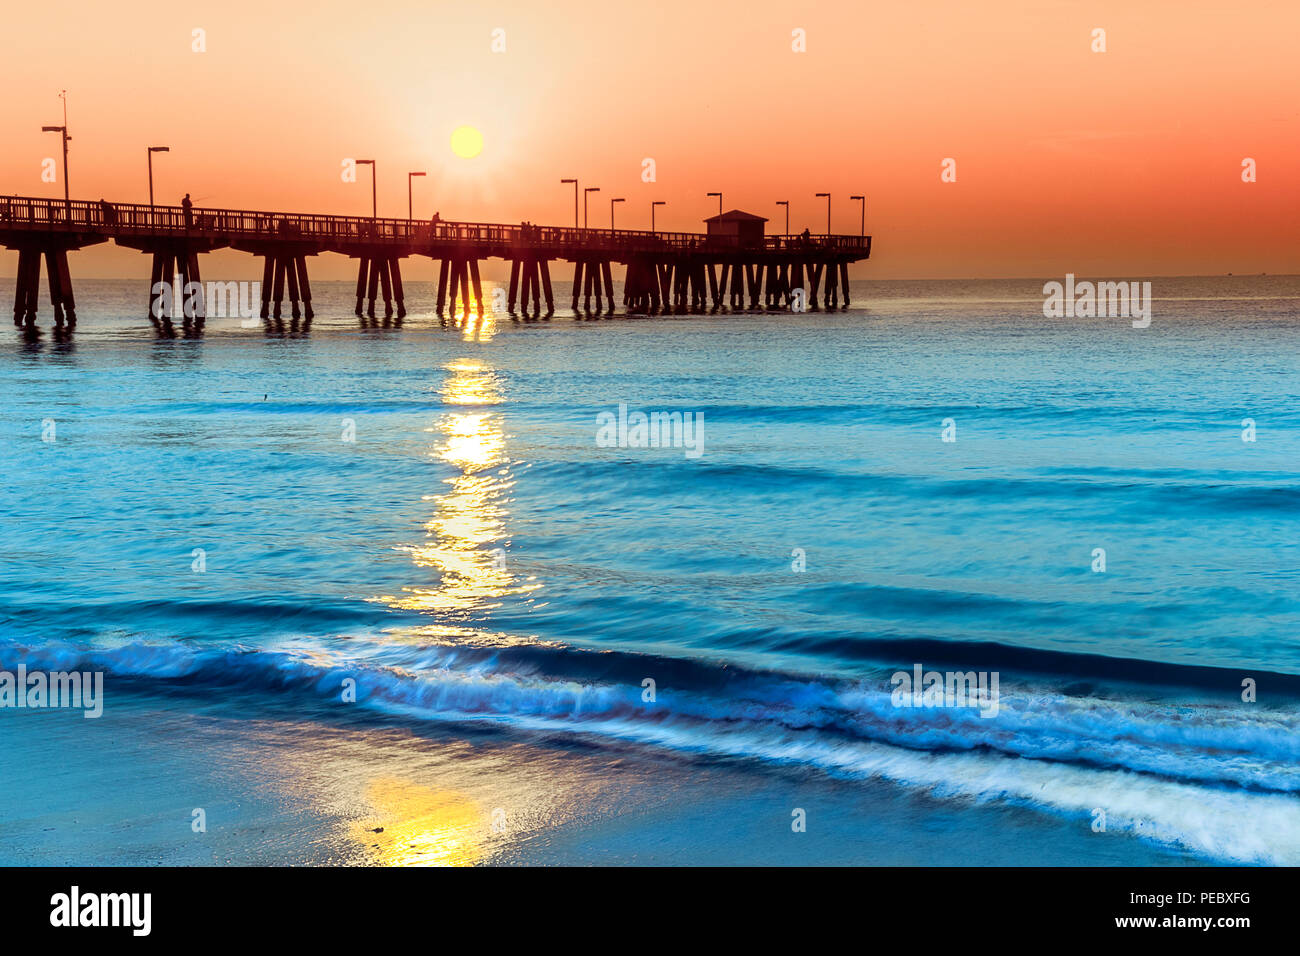 Oceanscape of the Pompano Pier and the Atlantic Ocean early morning during surise. Light surf, blue water and an orange sky on the ocean. Stock Photo